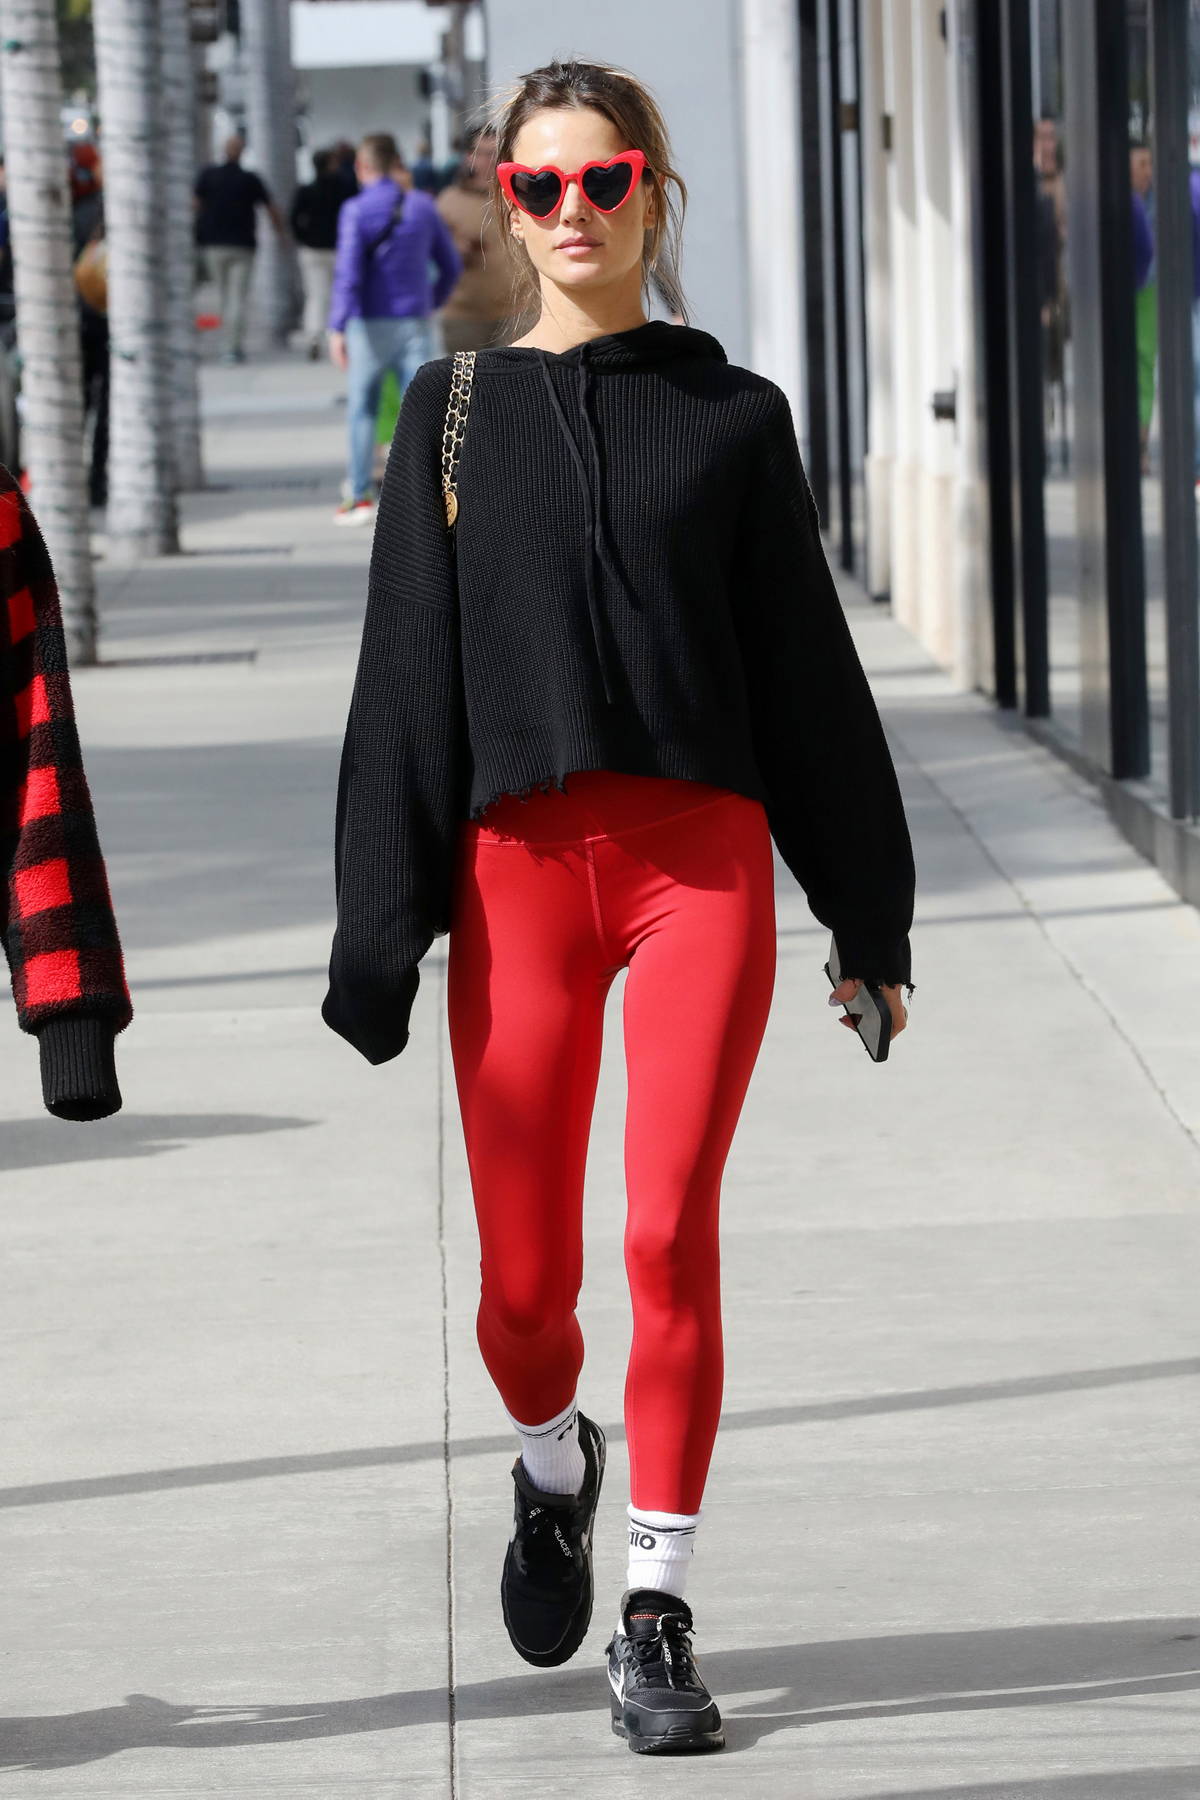 https://www.celebsfirst.com/wp-content/uploads/2023/02/alessandra-ambrosio-rocks-red-leggings-with-matching-heart-shape-sunglasses-while-out-on-valentines-day-in-beverly-hills-california-140223_11.jpg